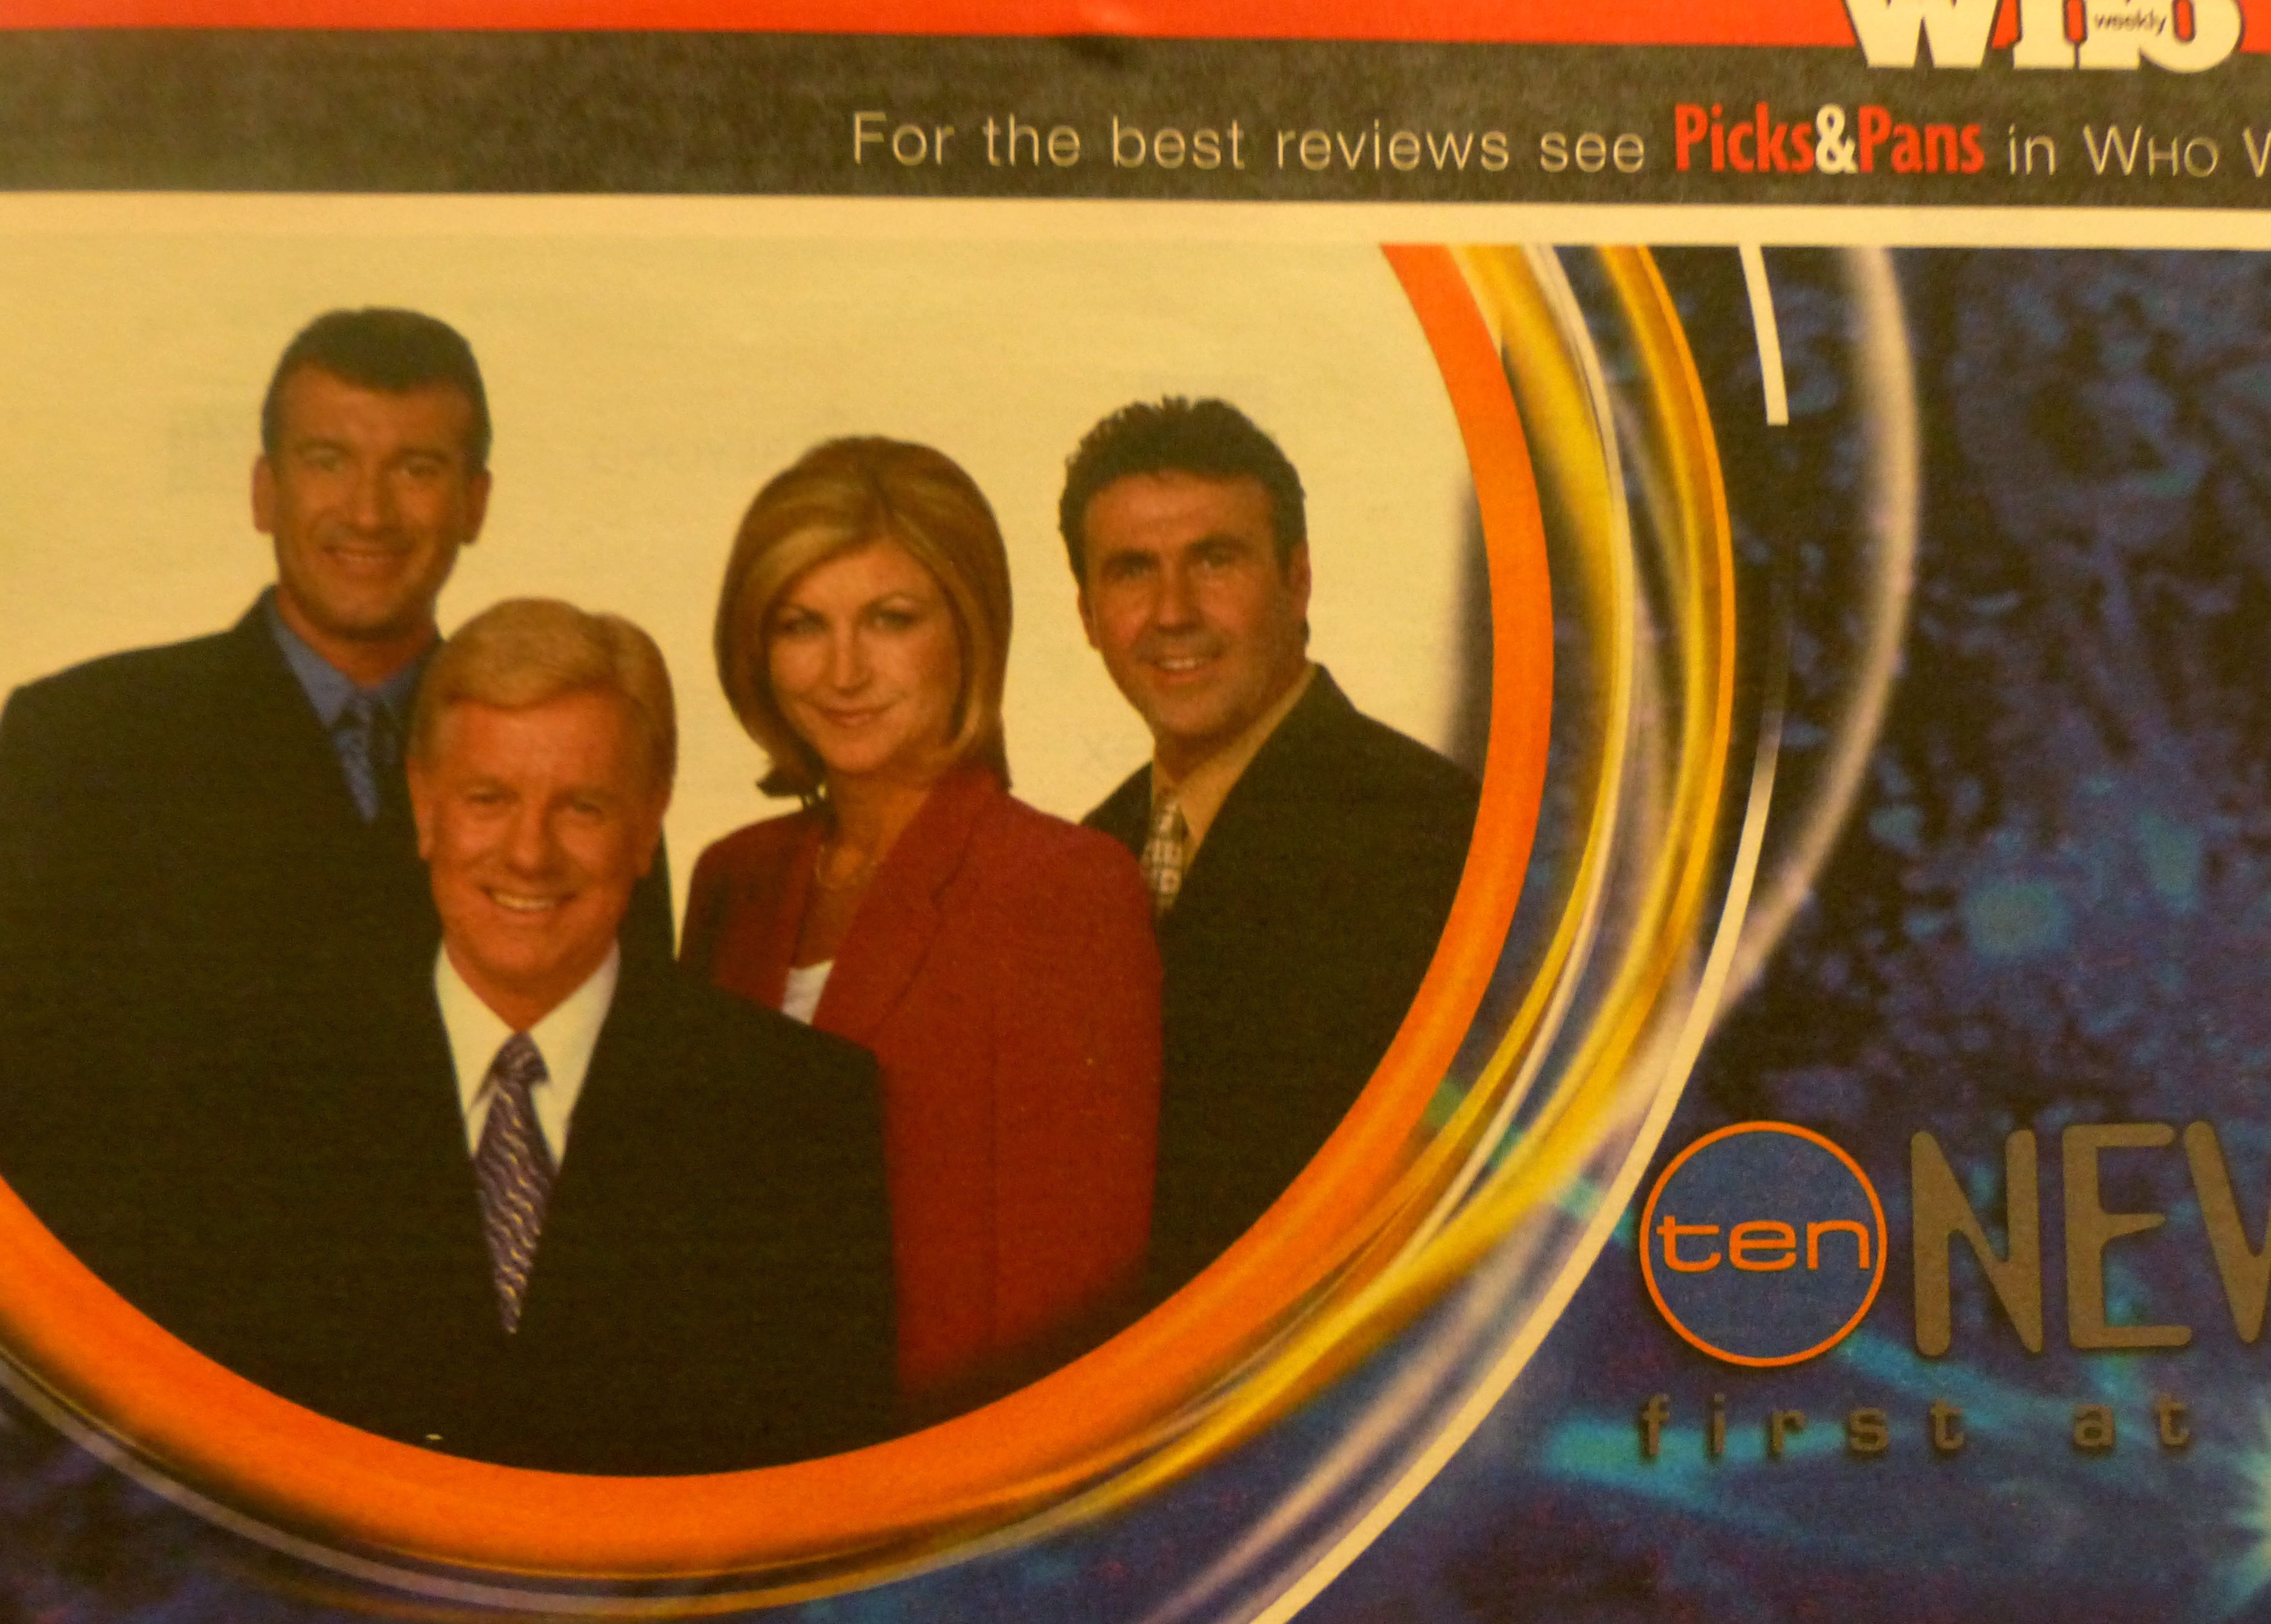 An old Ten News ad in 2000